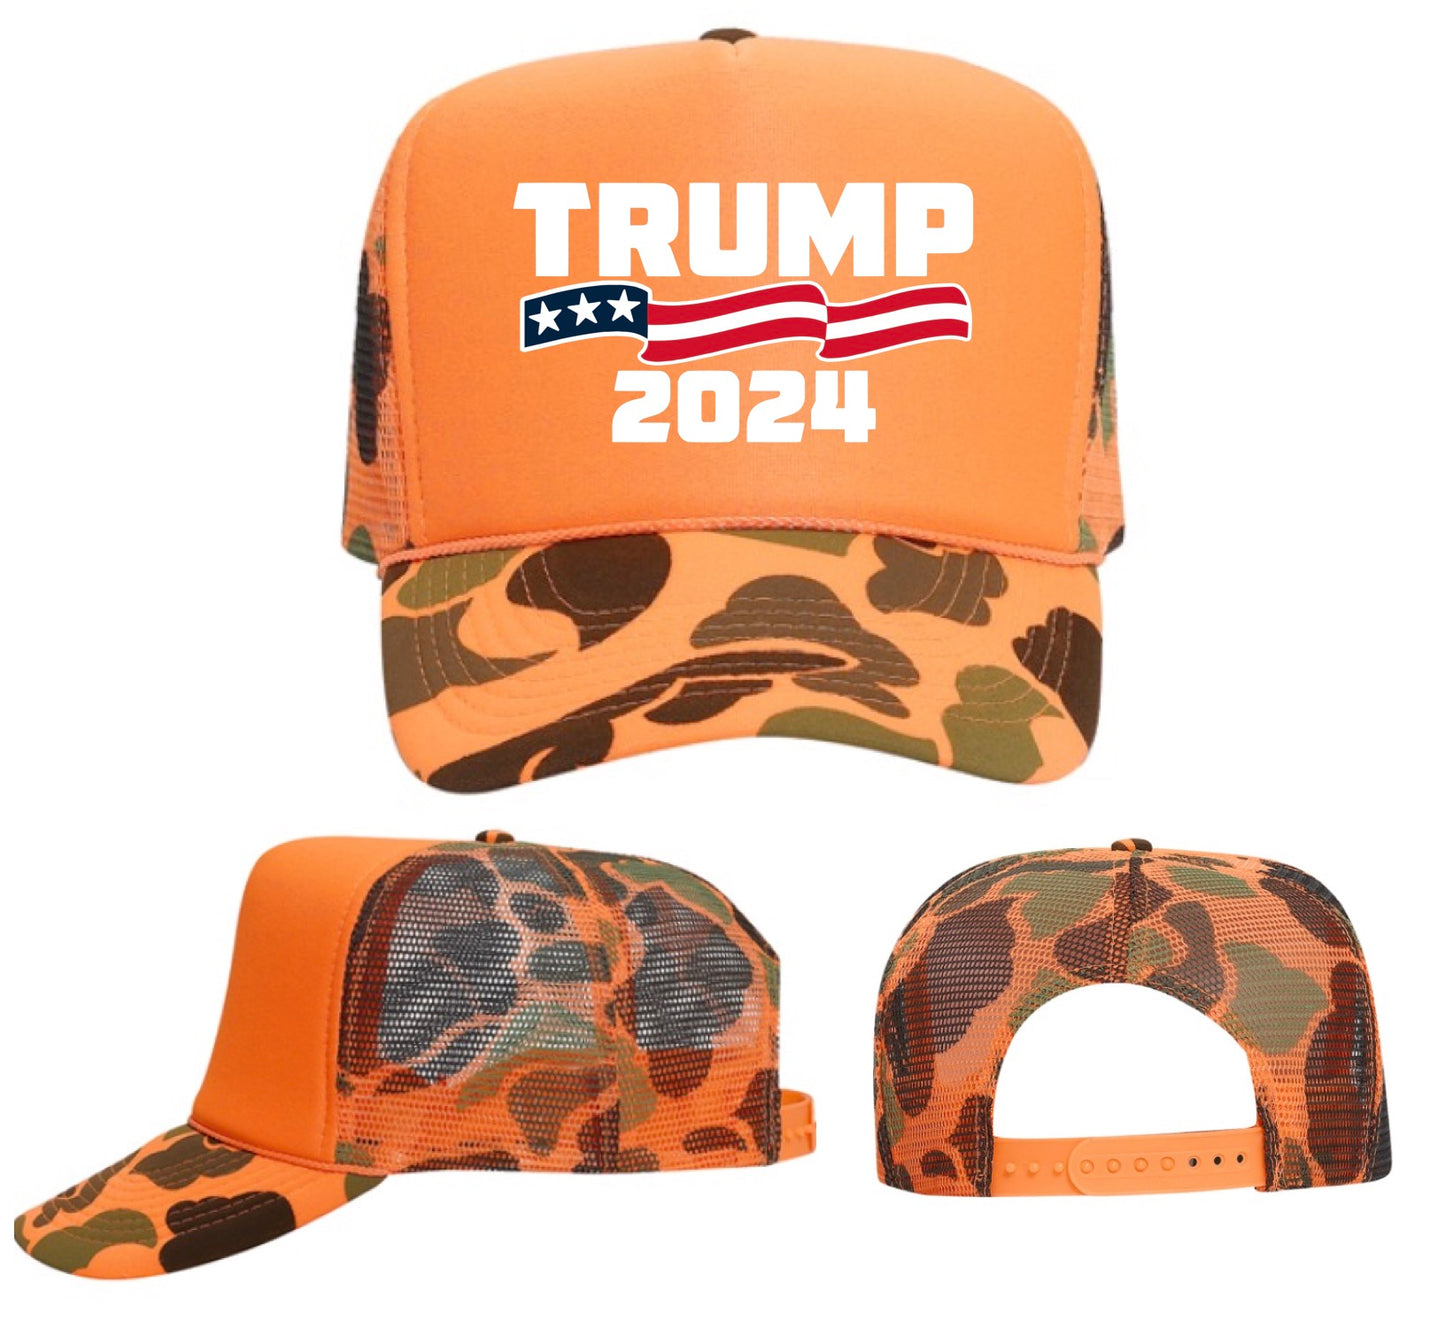 Trump 2024 Hat Limited Edition